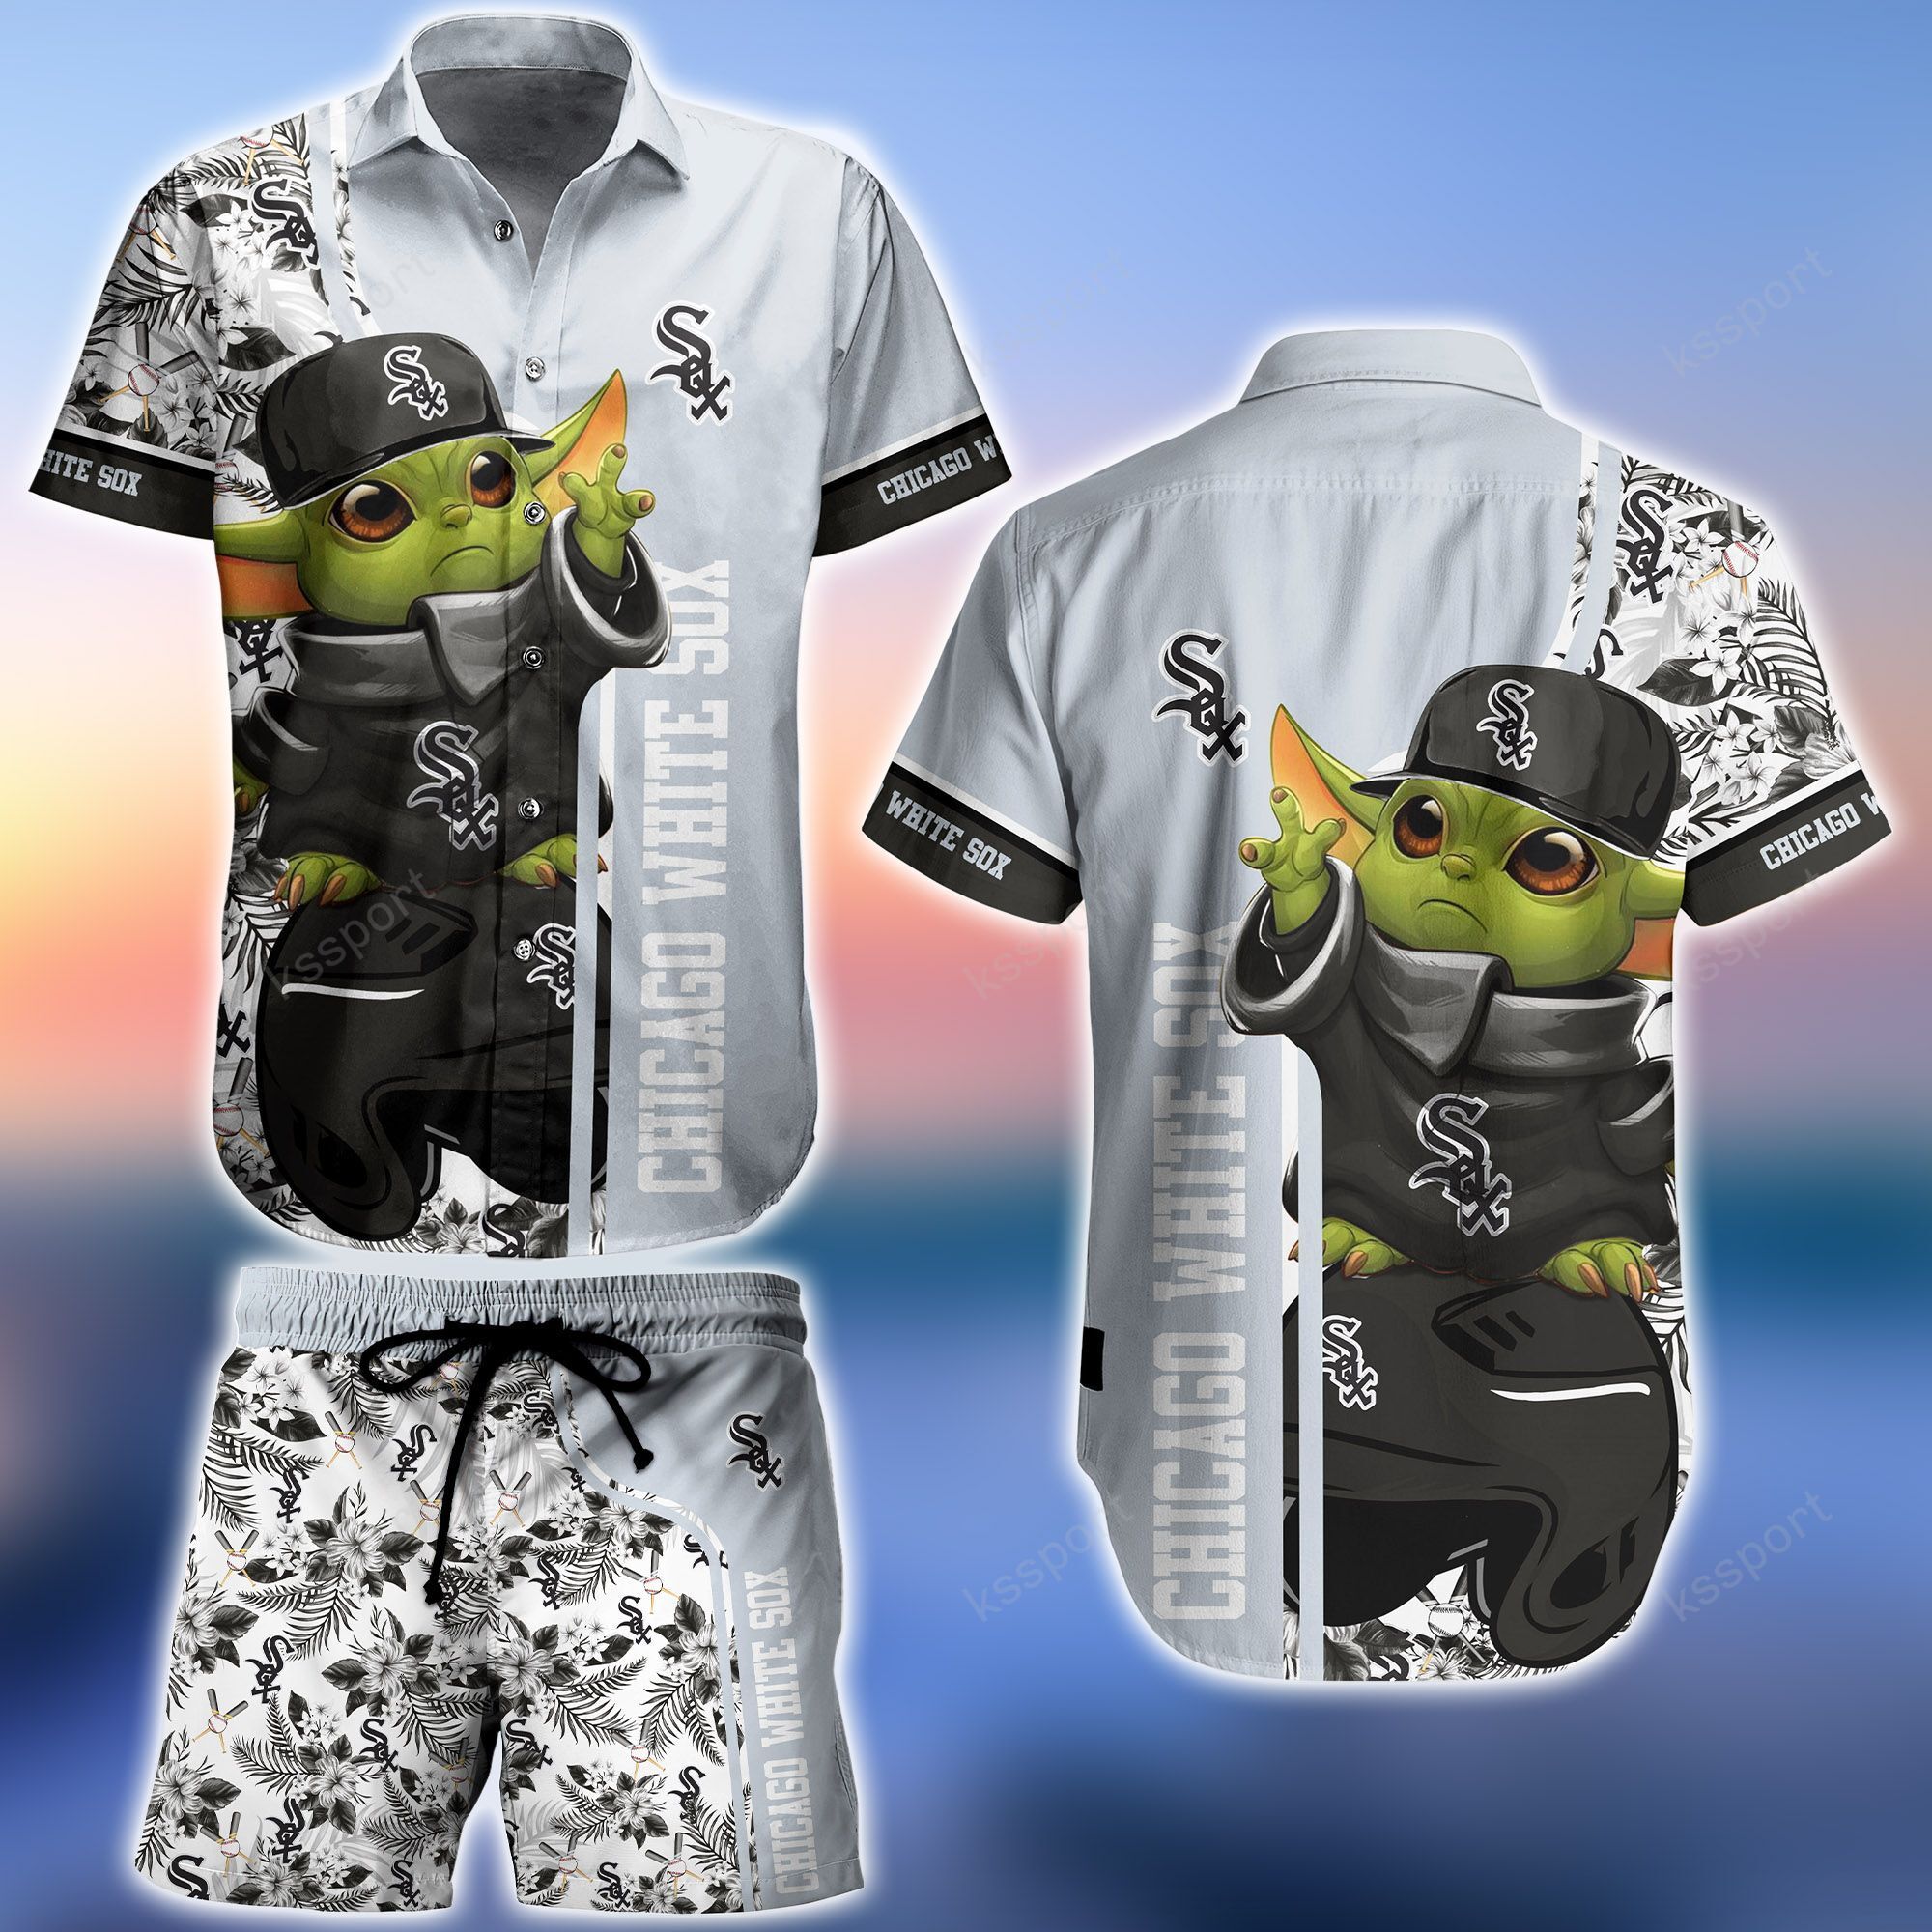 Make sure to check out the latest summer fashion on our website 18